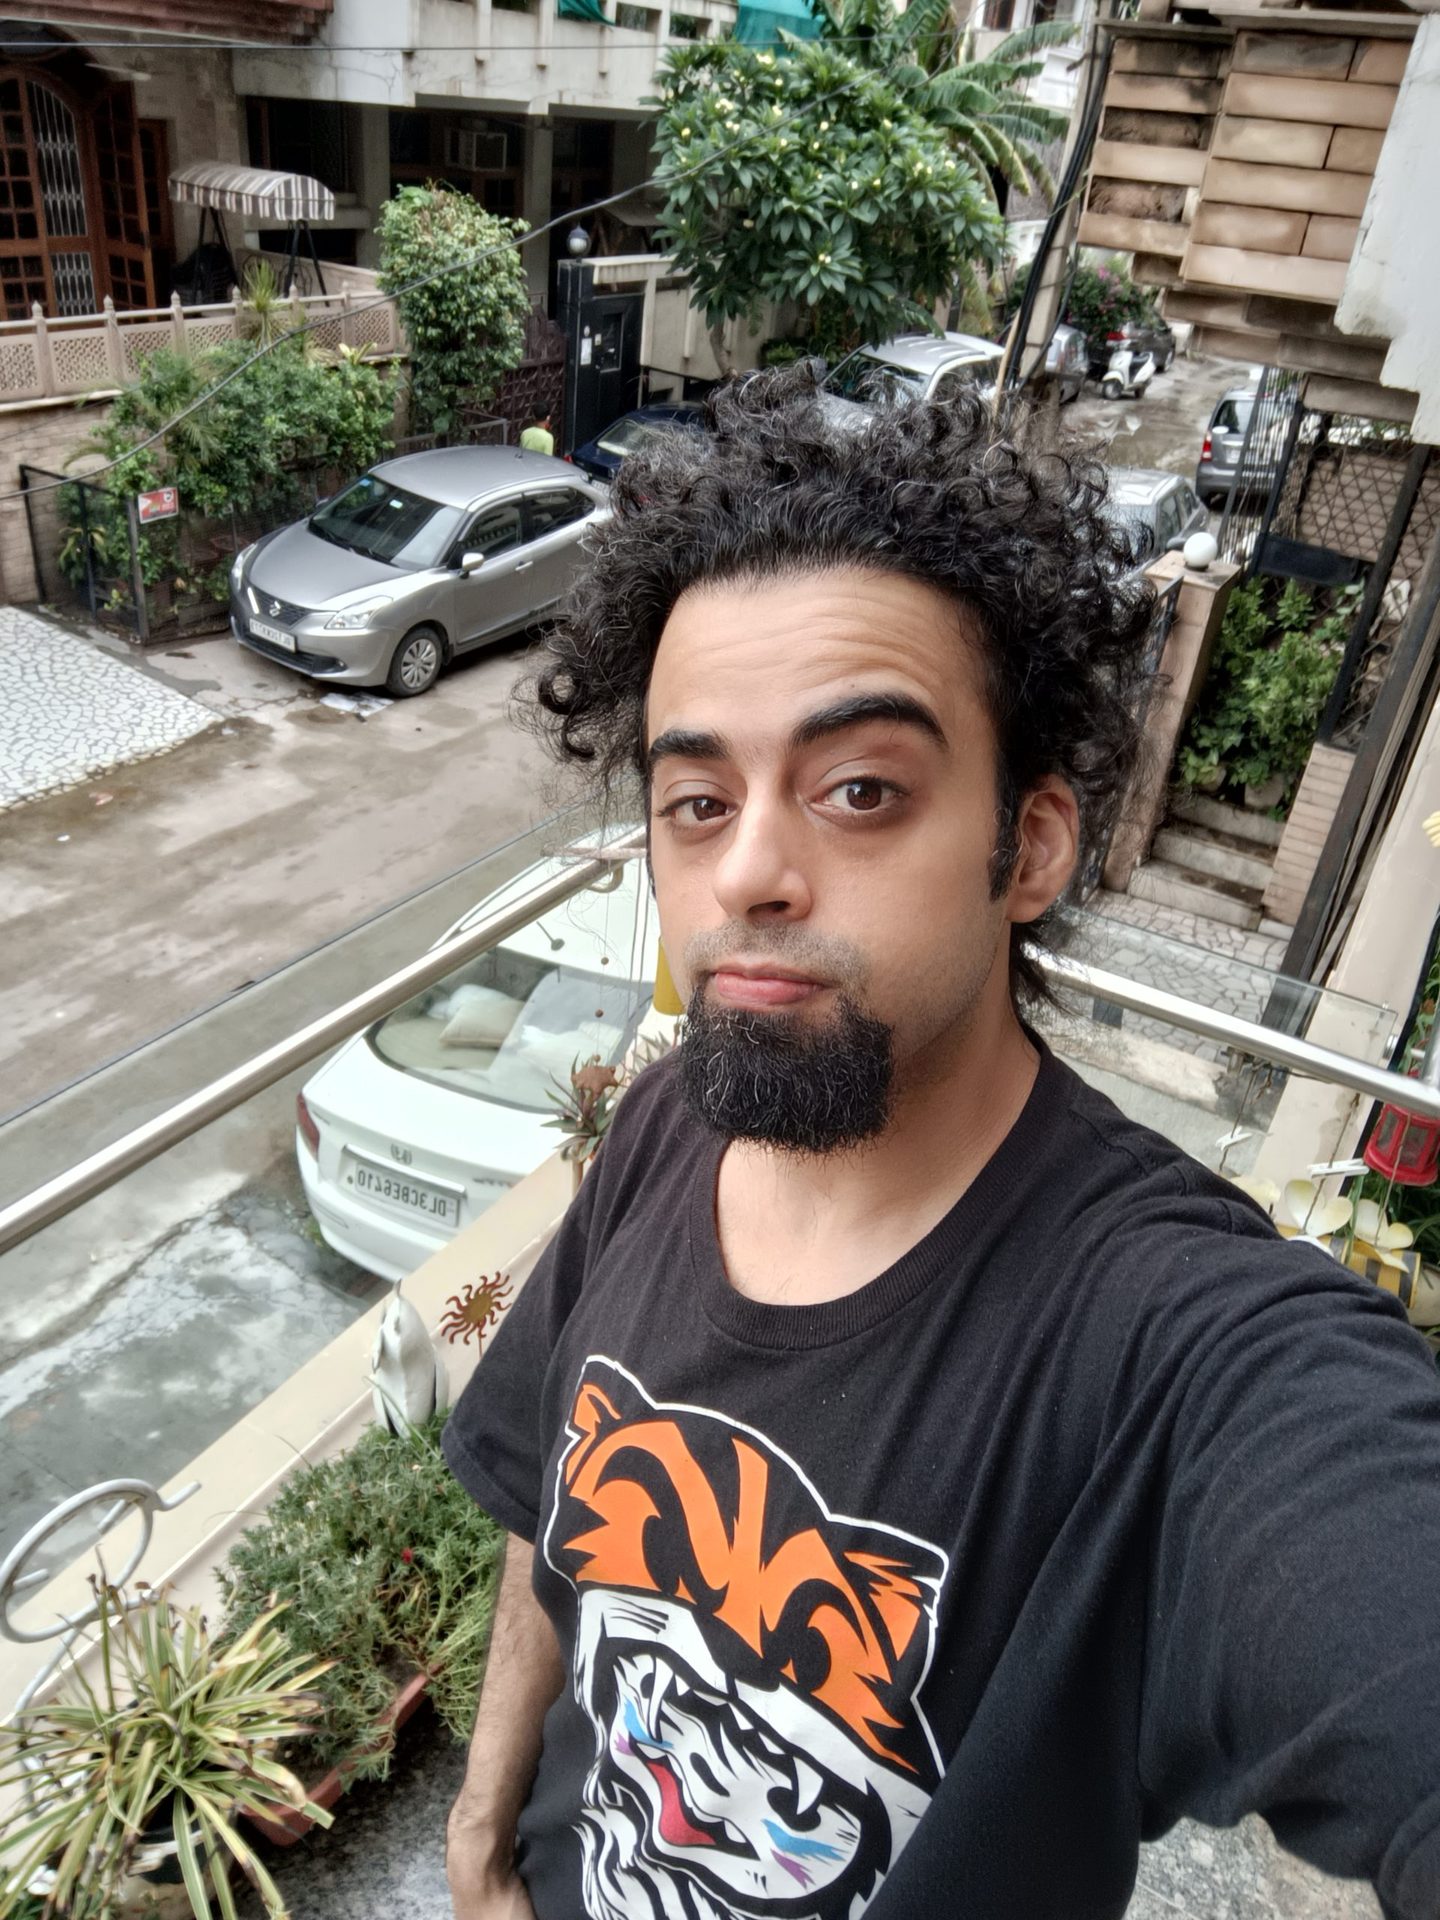 The Oppo Reno 6 Pro selfie standard showing a man with black hair and beard in a black t-shirt with orange pattern standing on a balcony above the street below.